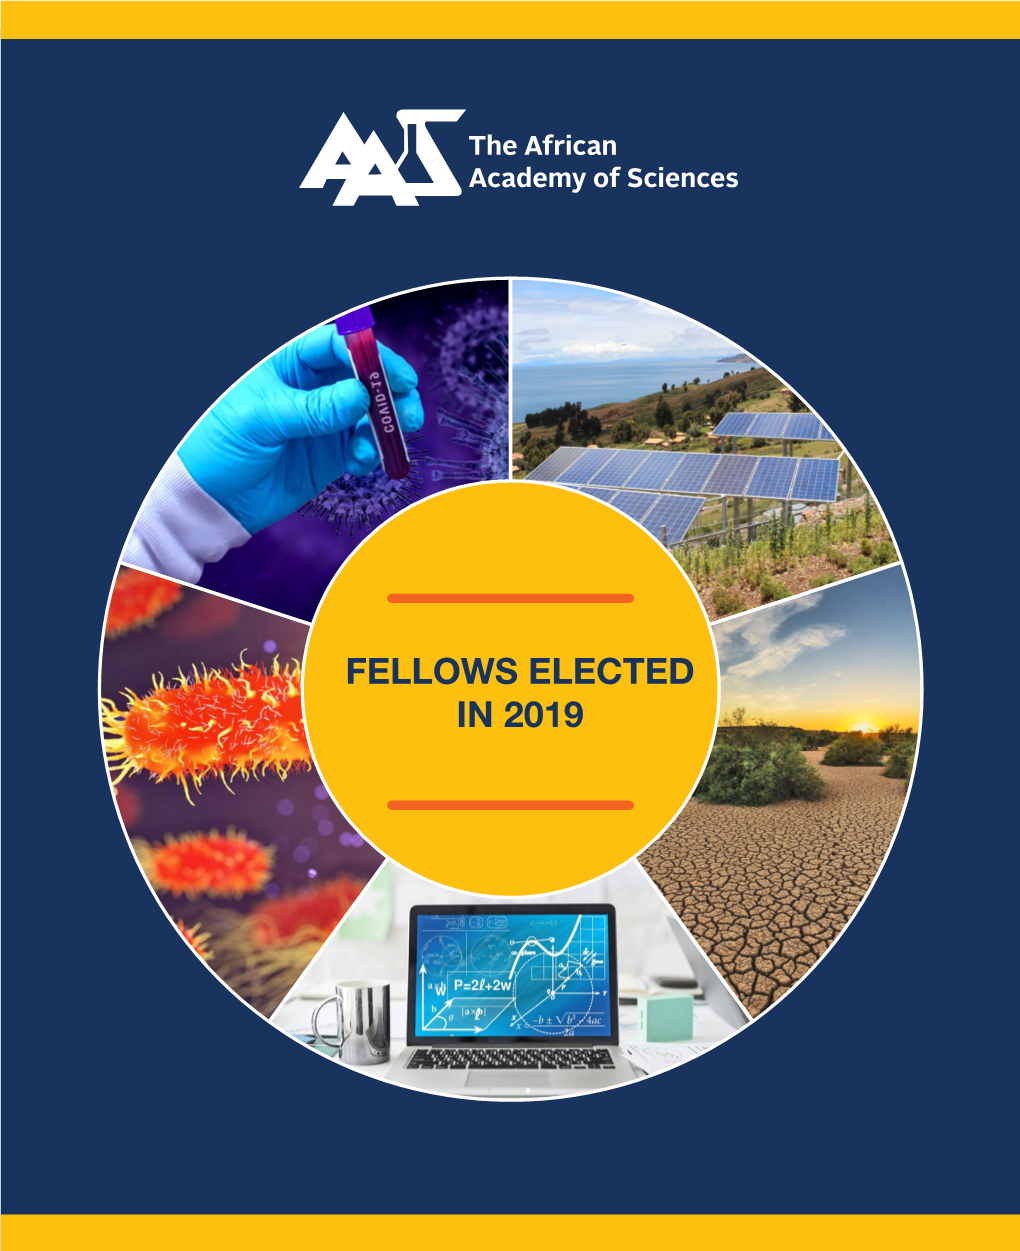 Fellows Elected in 2019